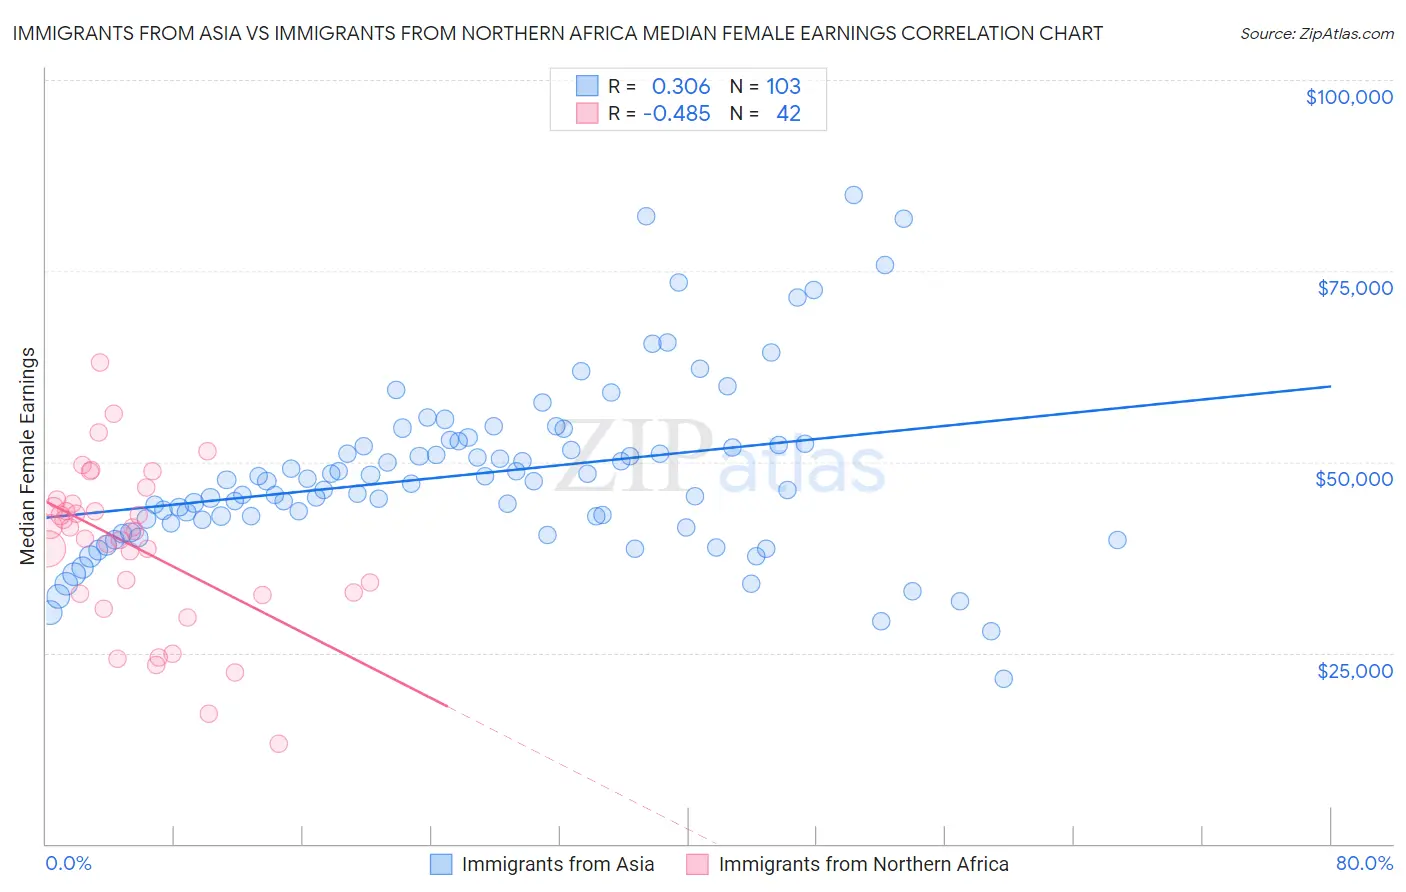 Immigrants from Asia vs Immigrants from Northern Africa Median Female Earnings